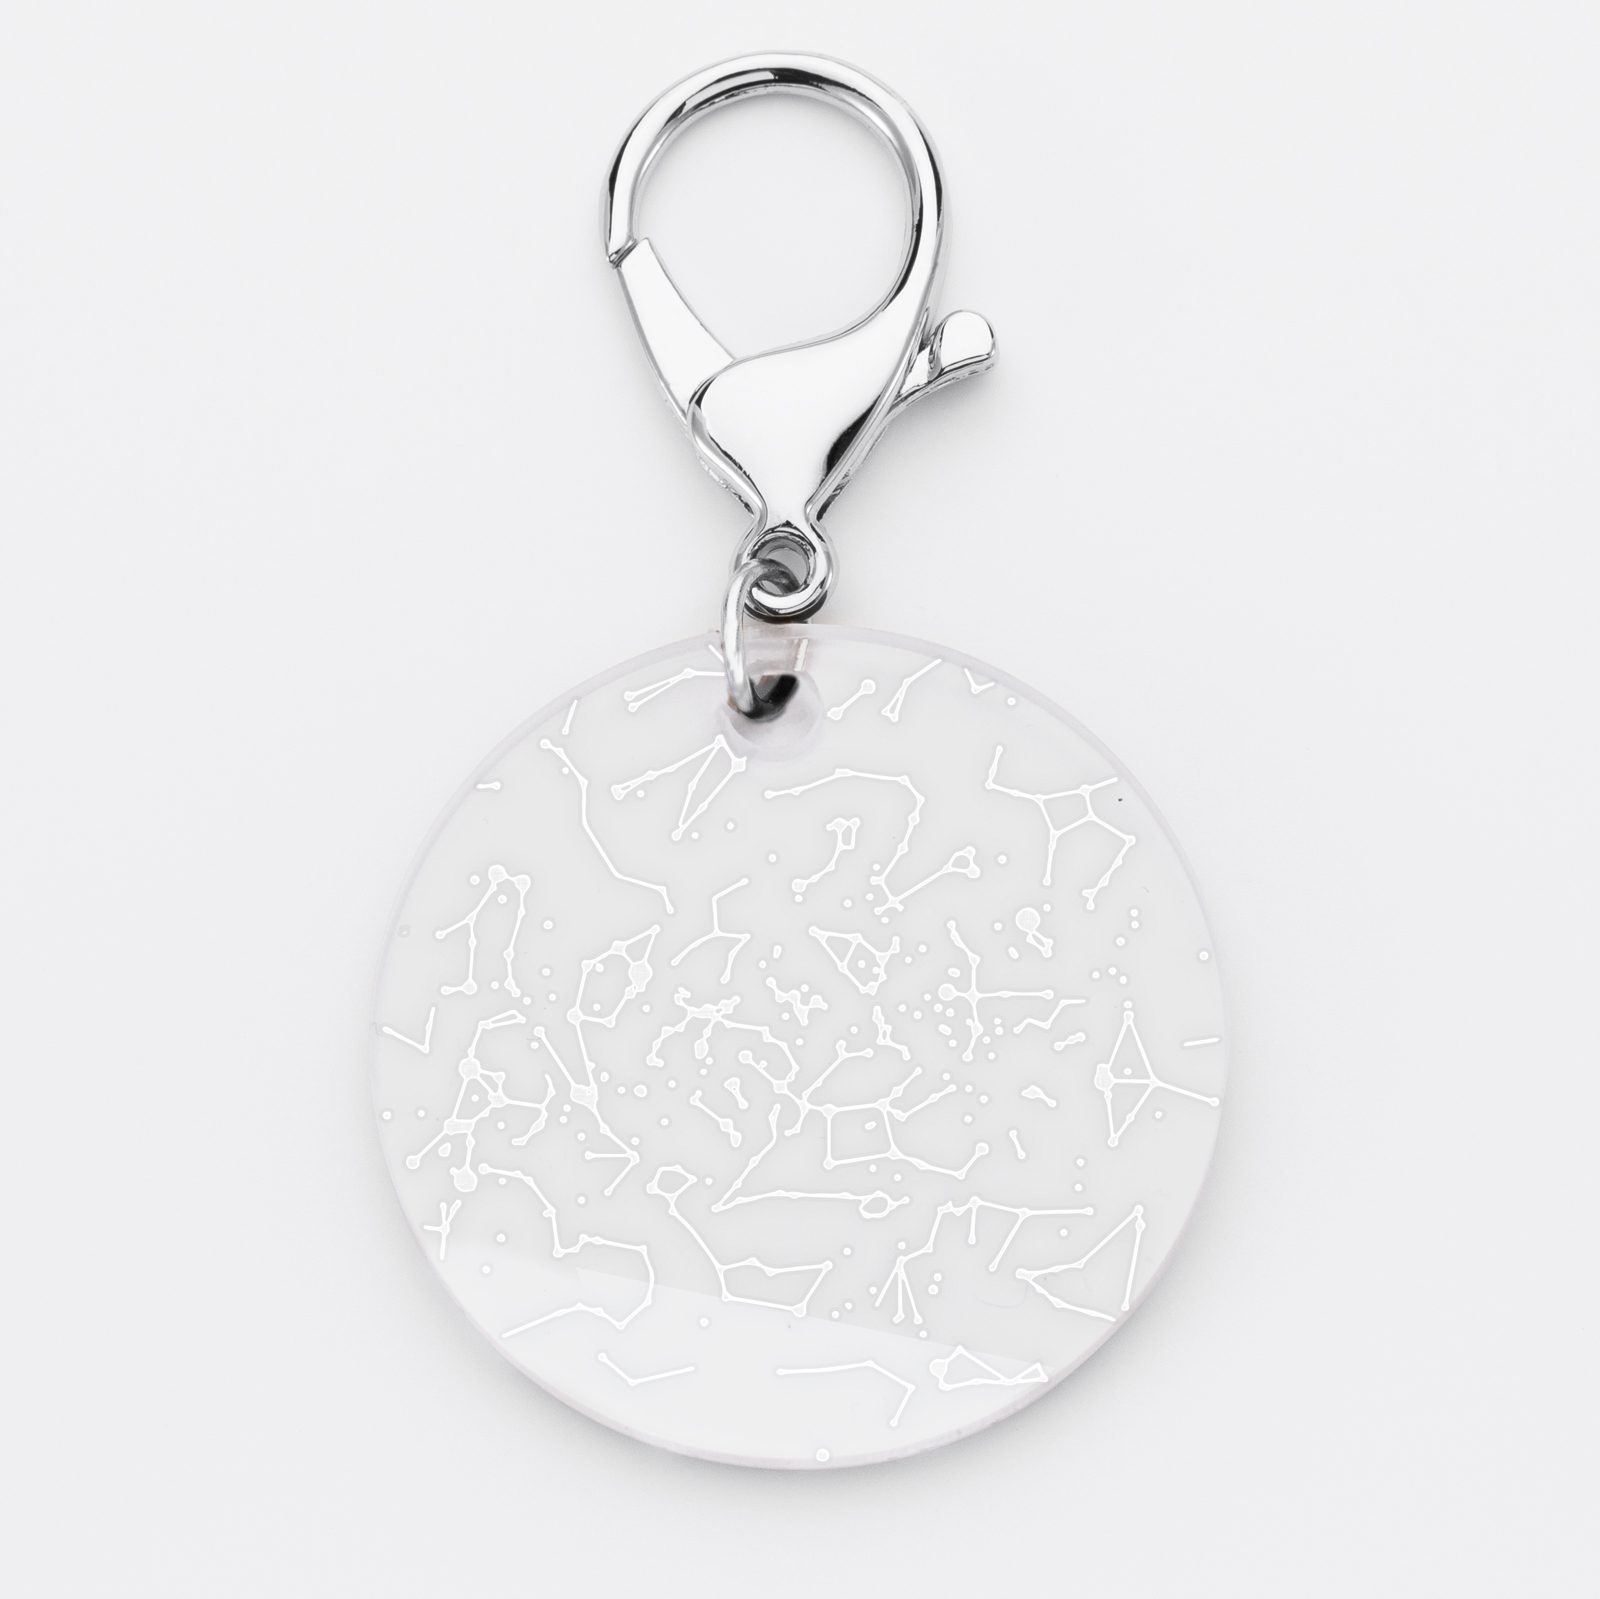 Personalised keyring with engraved acrylic medaillion 50mm ‘Stars map’